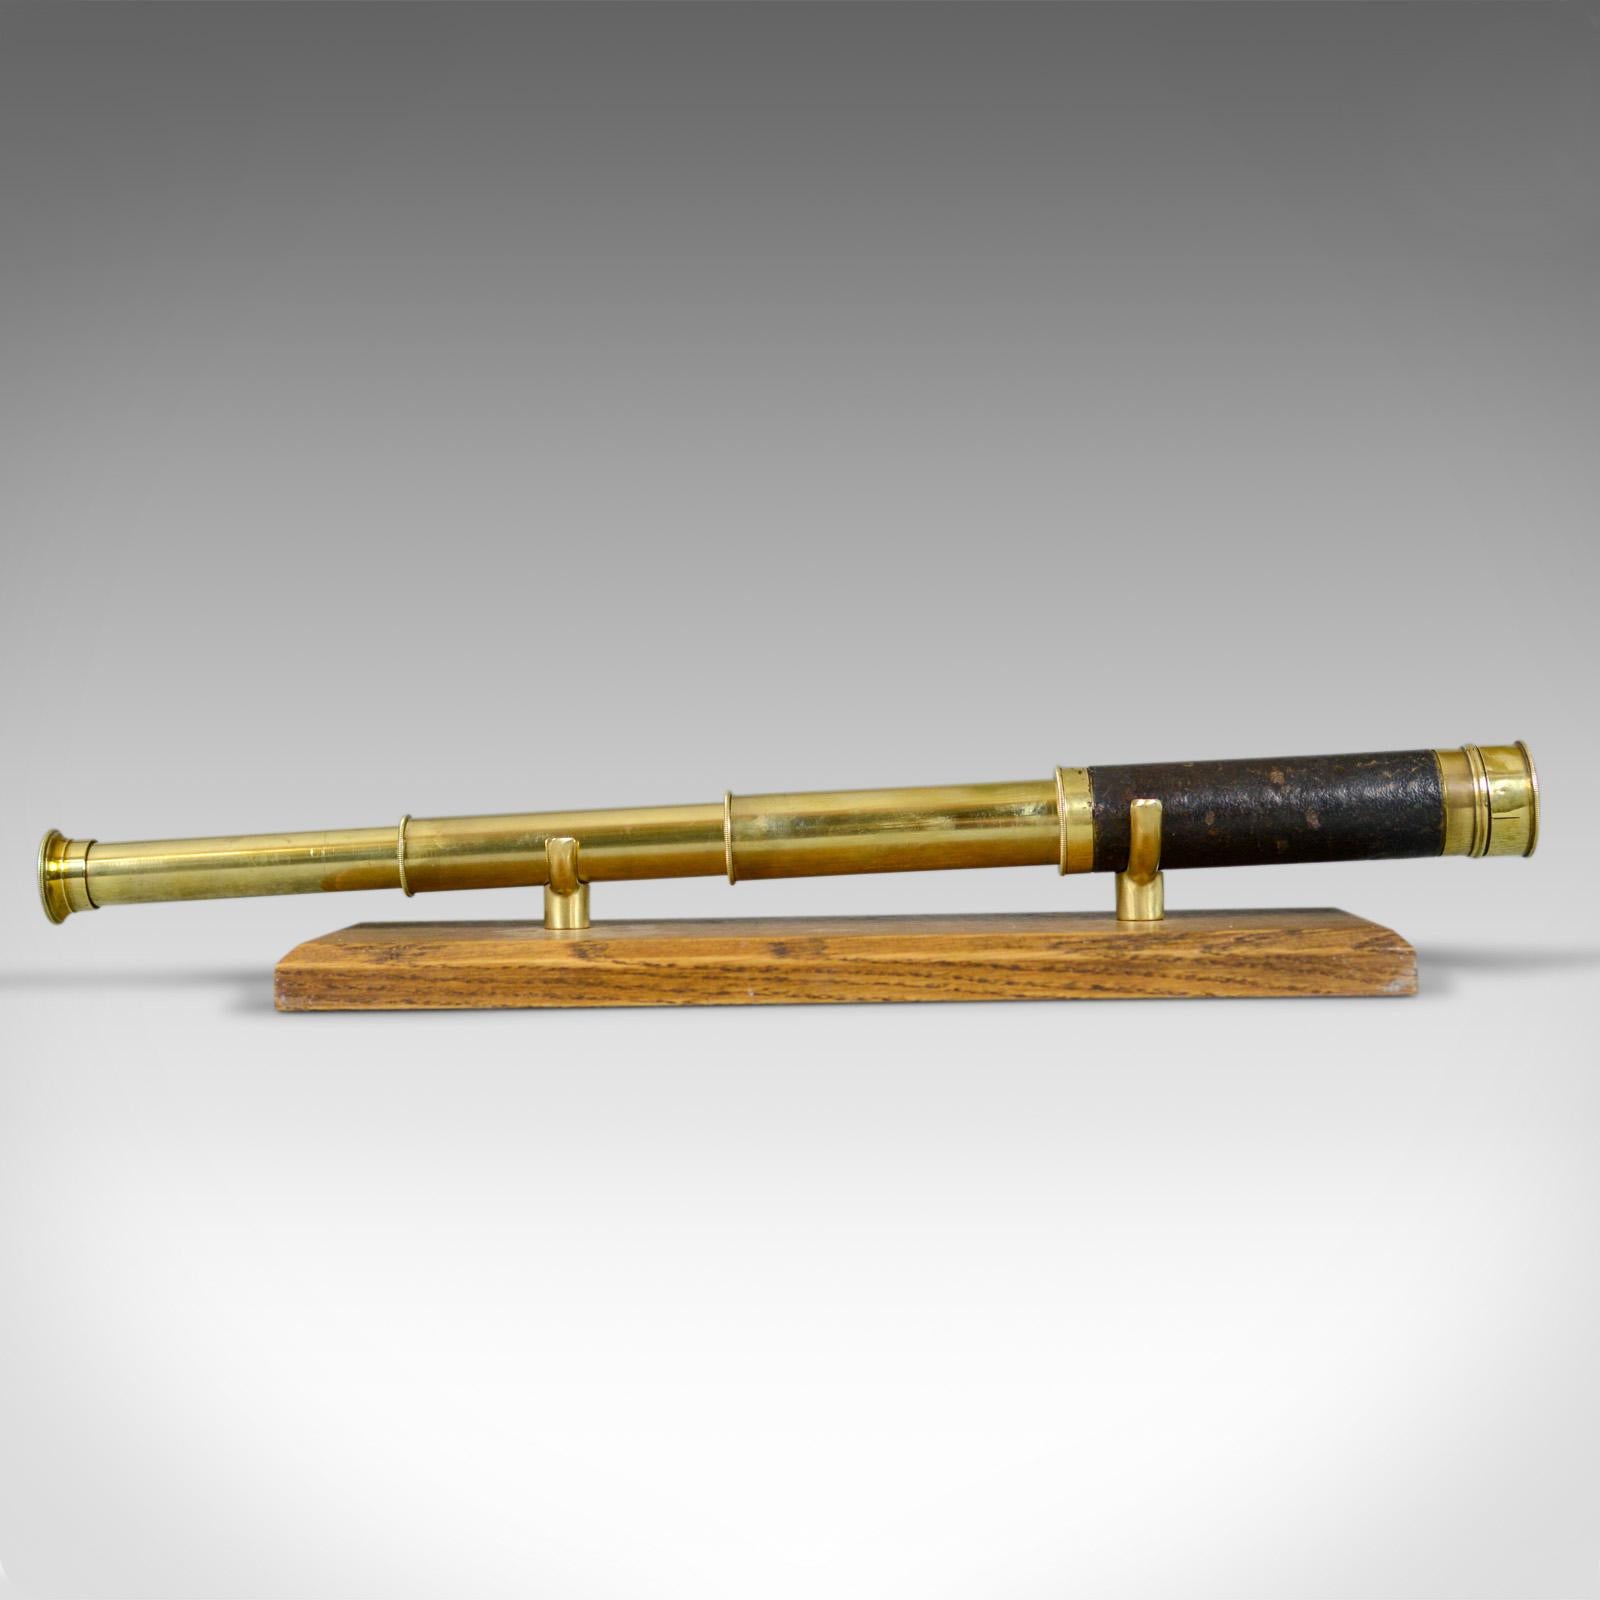 This is an antique pocket telescope, a three draw refractor for terrestrial or astronomical use. An English Victorian Scope dating to the late 19th century circa 1900.

Perfect for bird watching, landscape appreciation, wildlife, or maritime